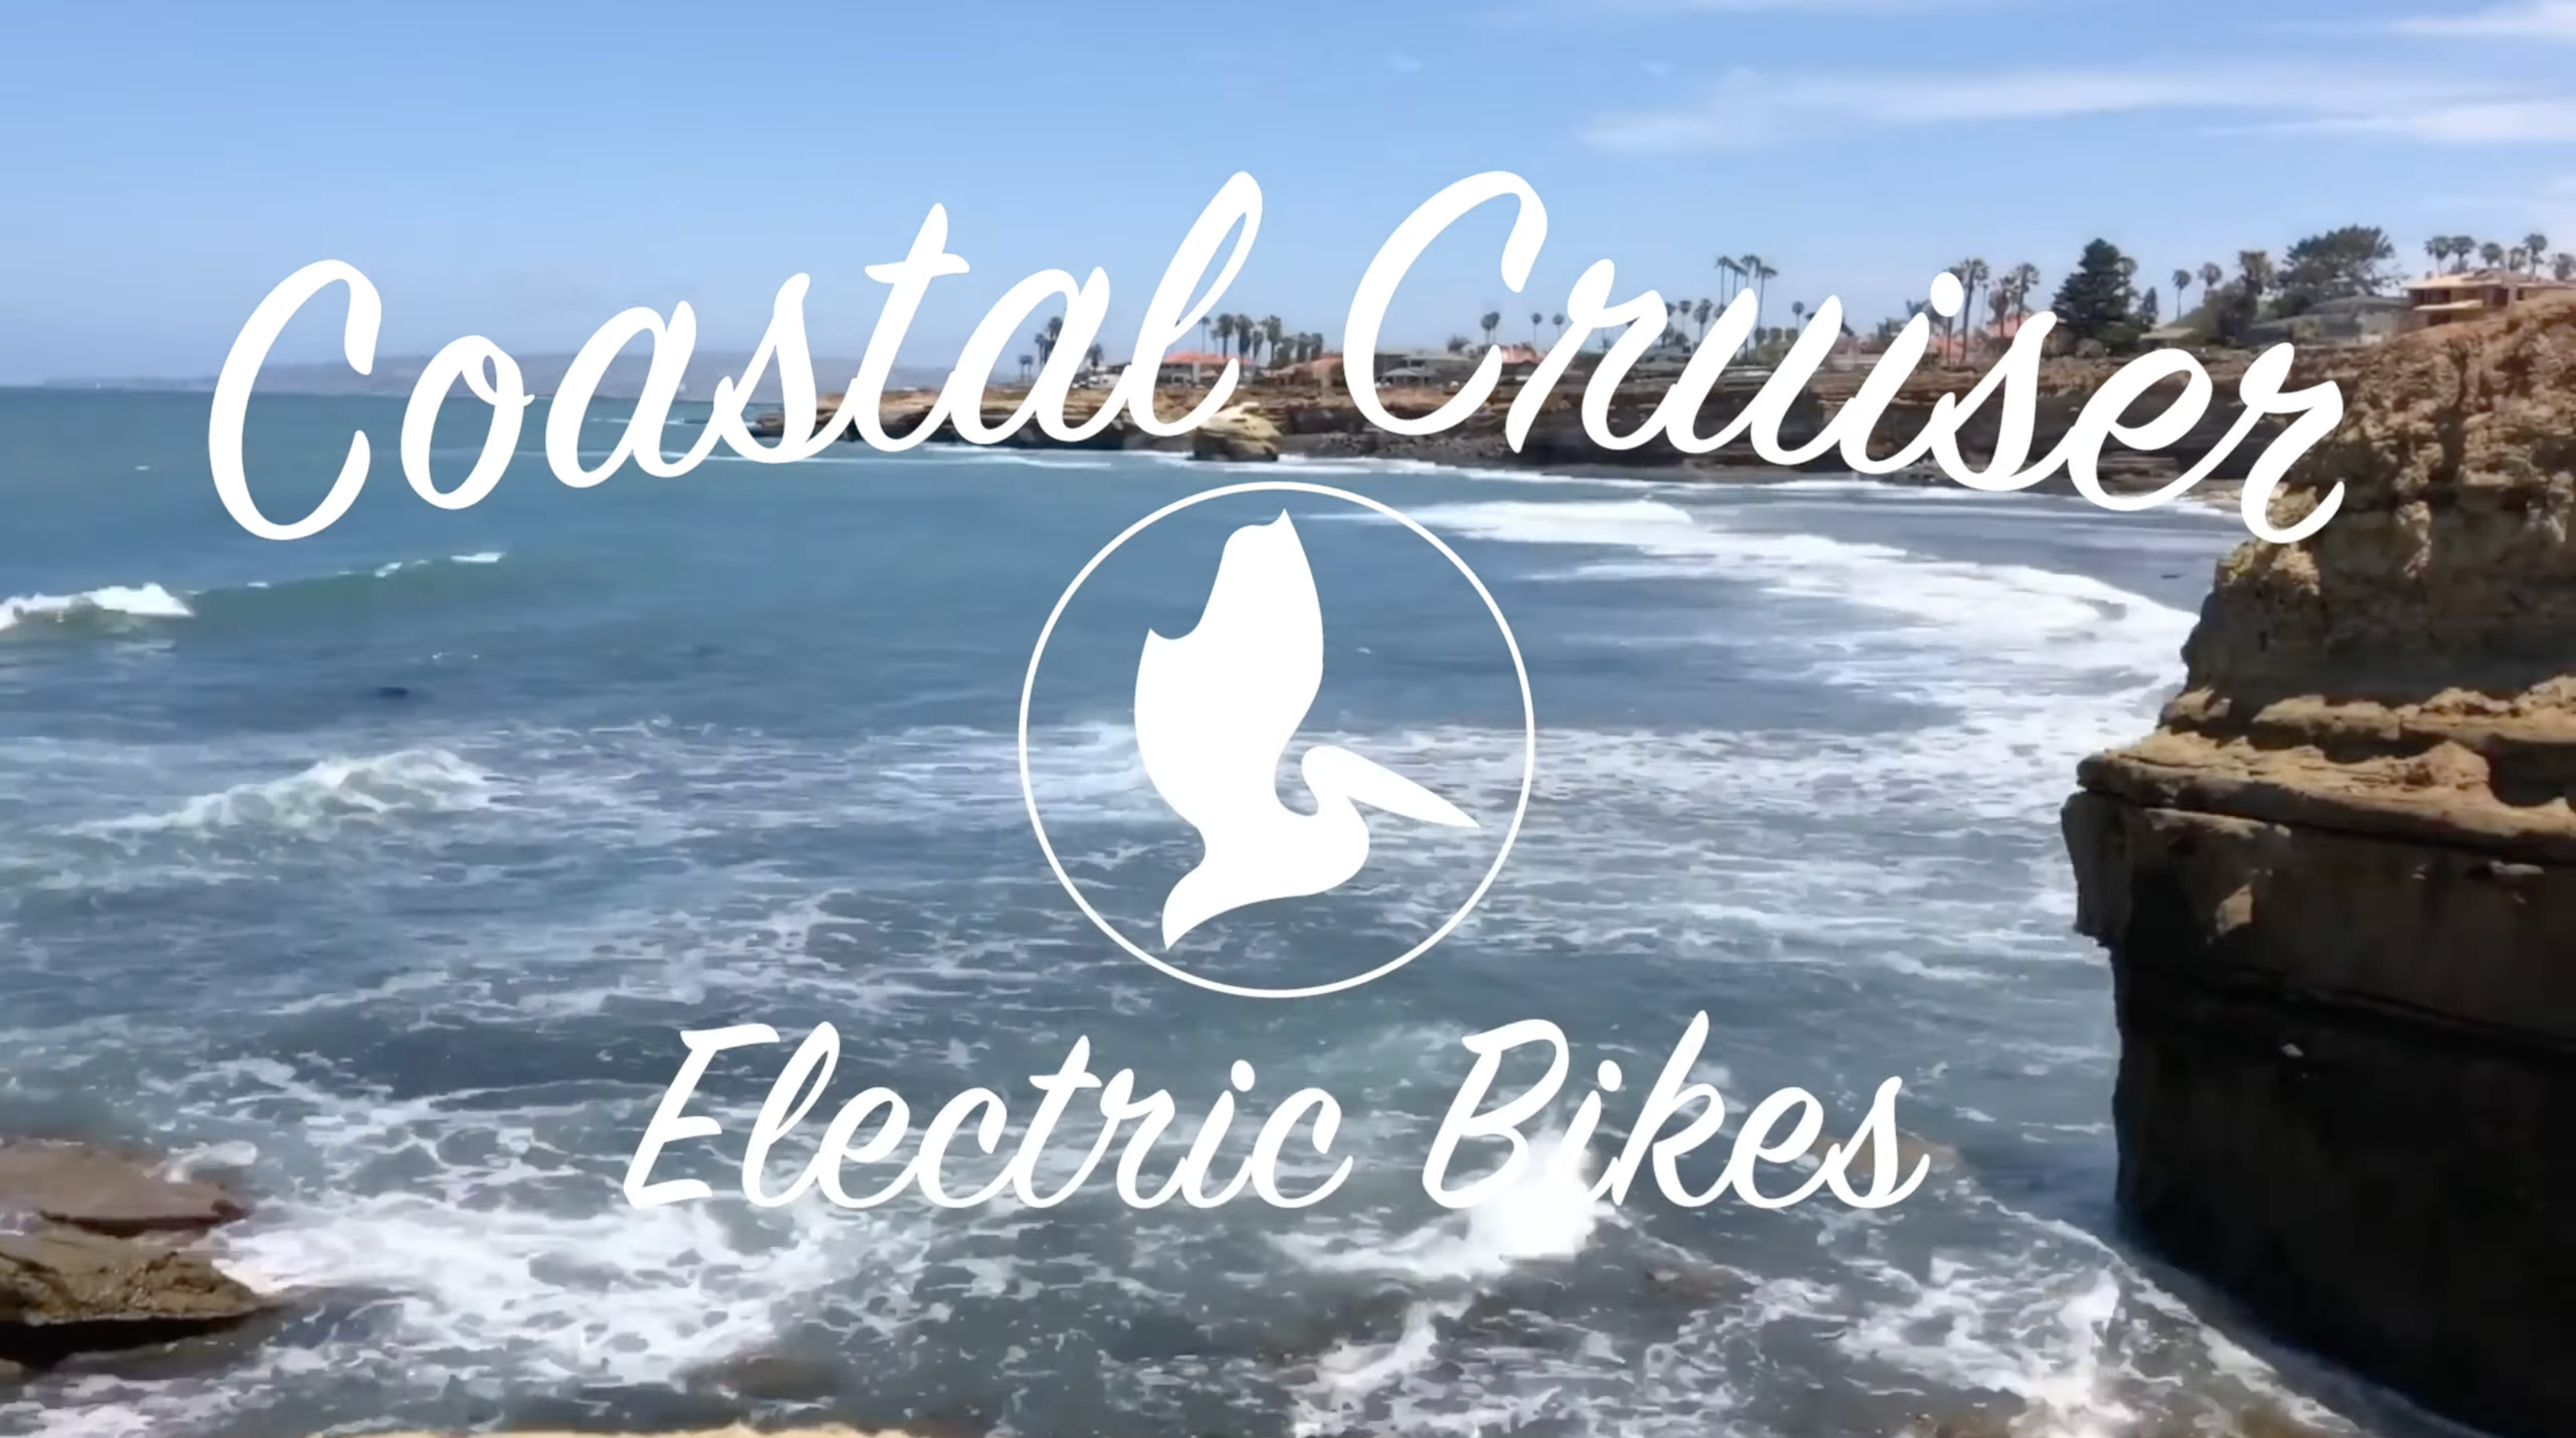 Load video: Coastal Cruisers Electric Beach cruisers in stock now